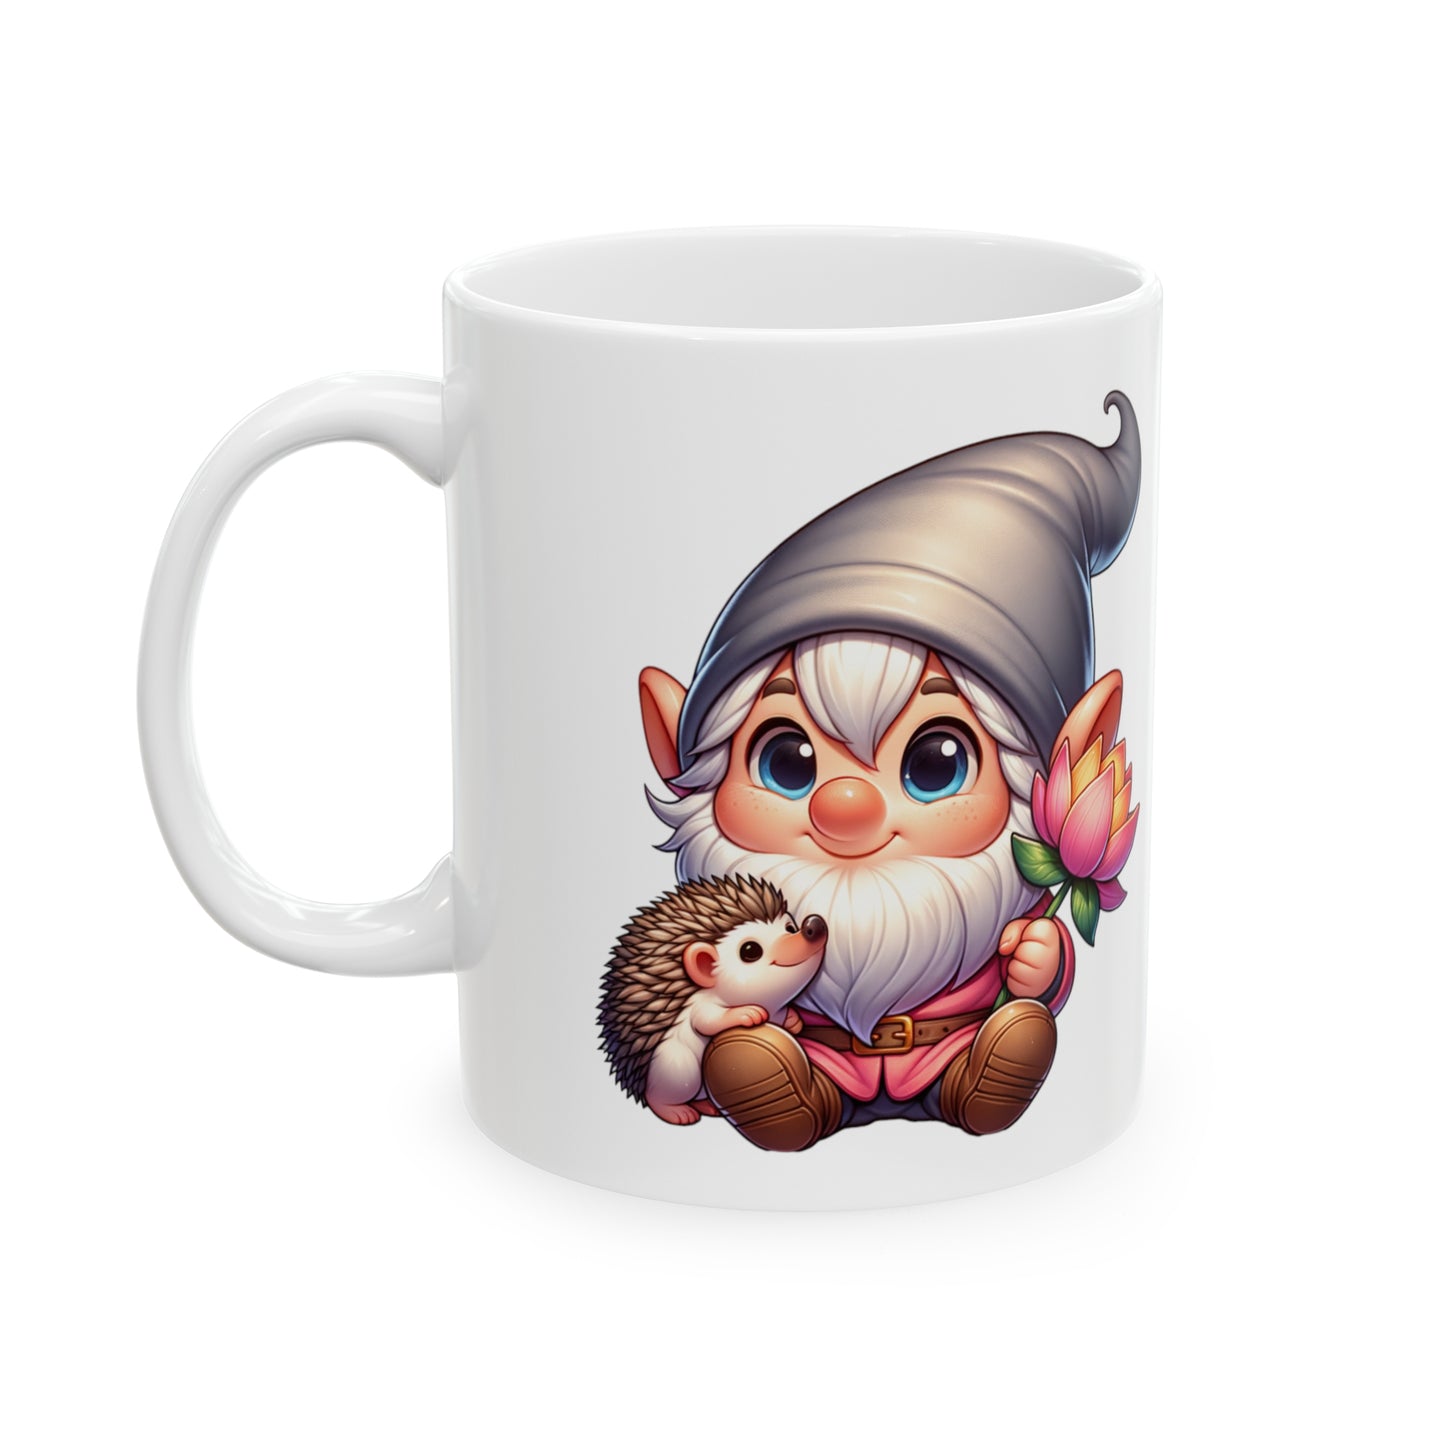 Gnome Hedgehog Lotus Mug Father's Day Gift, Birthday Coffee Cup for Best Gnomie Dad Peaceful Companion for Dad's Moments, Ceramic Mug, 11oz